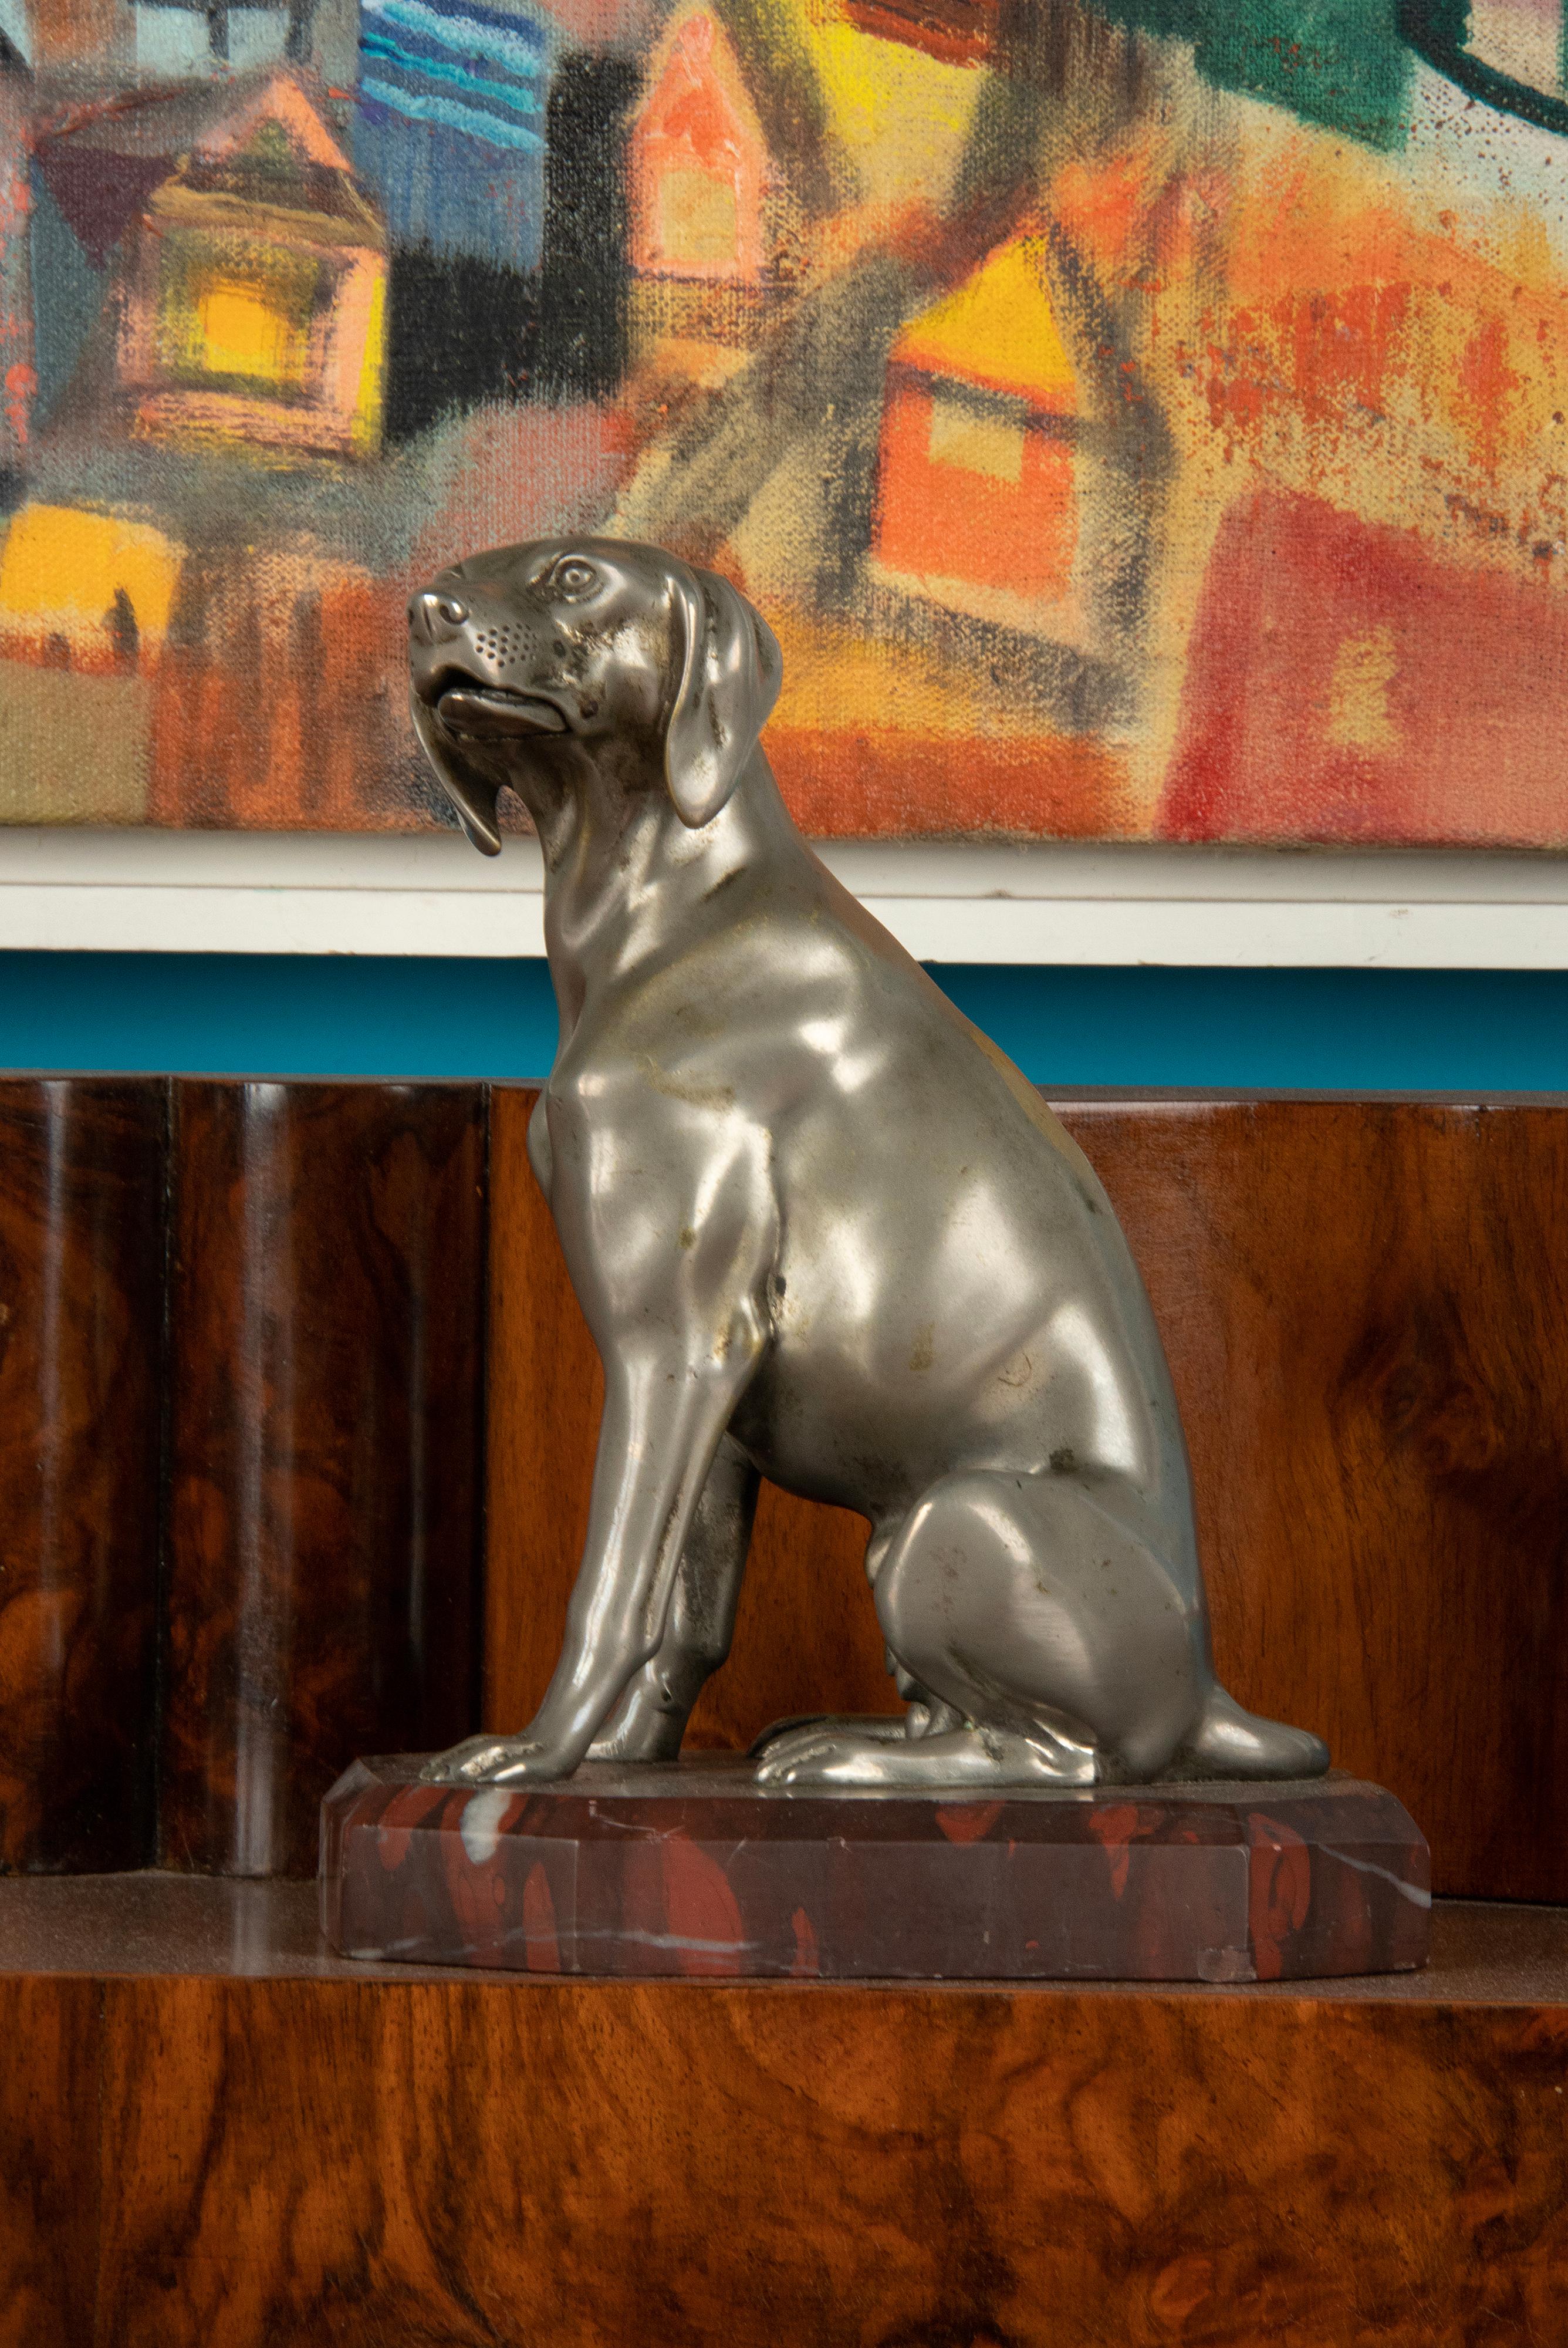 An antique sculpture of a dog made of nickel-plated spleter (zinc alloy). Sitting on a red “Griotte” marble plinth. Made in France, circa 1910-1920. No signature.